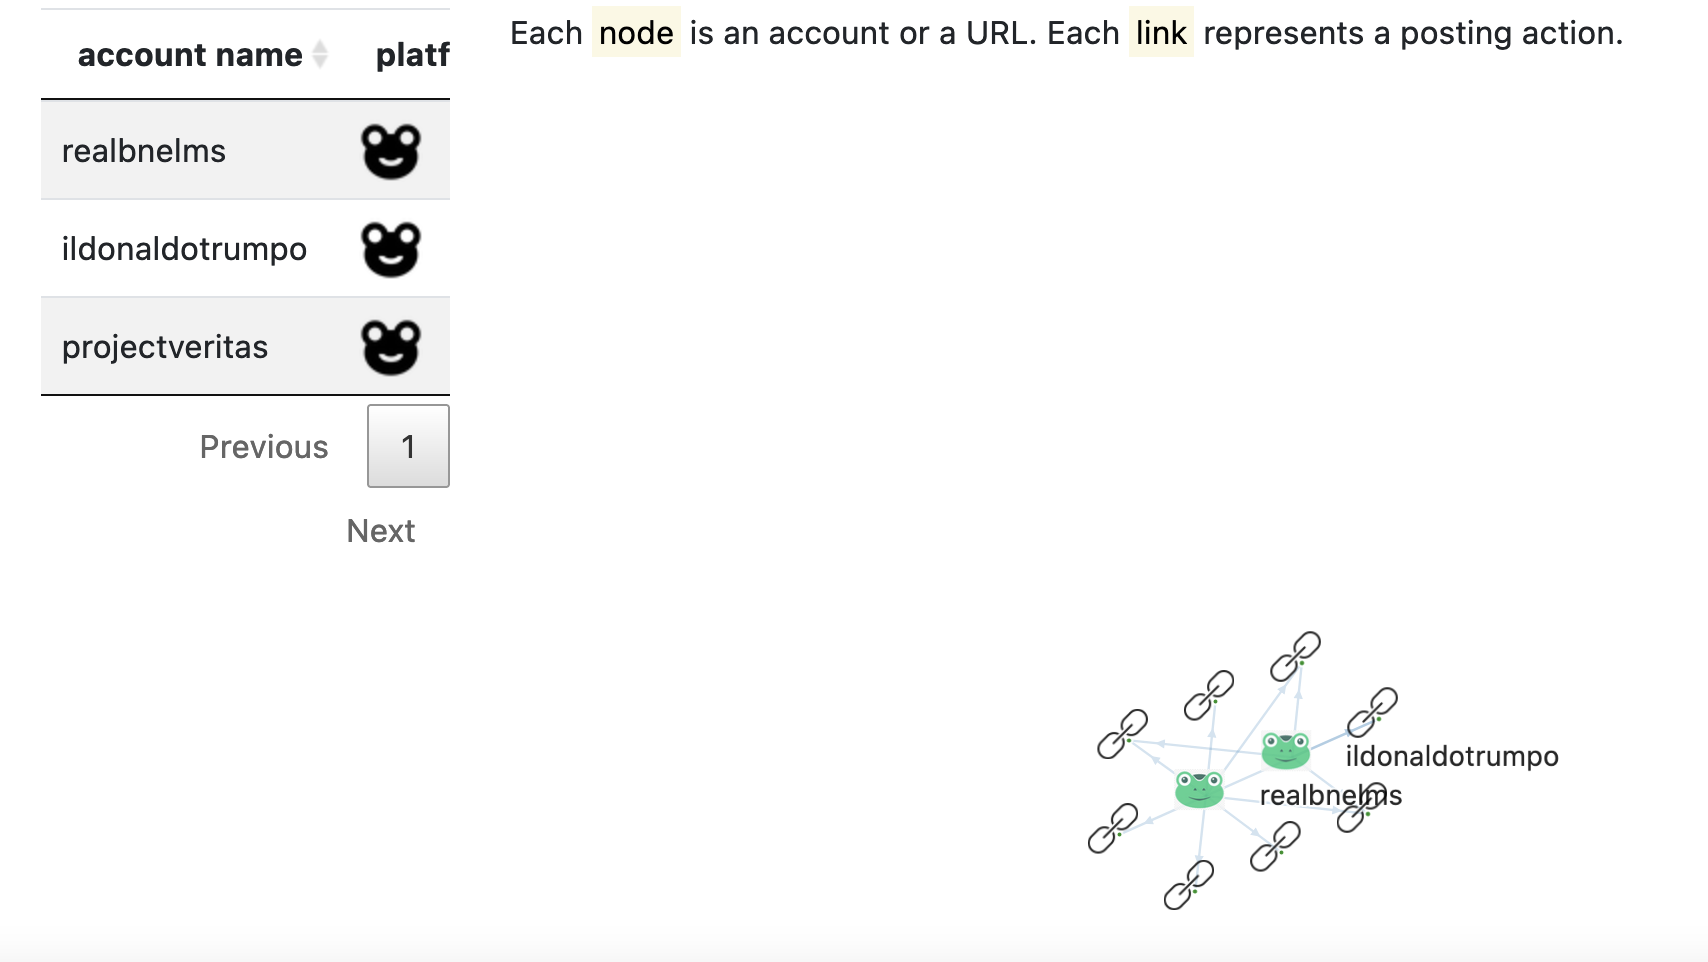 Visulizing an information campaign. Node is either a URL, or an account. Two nodes are connected if an account has shared that URL before.